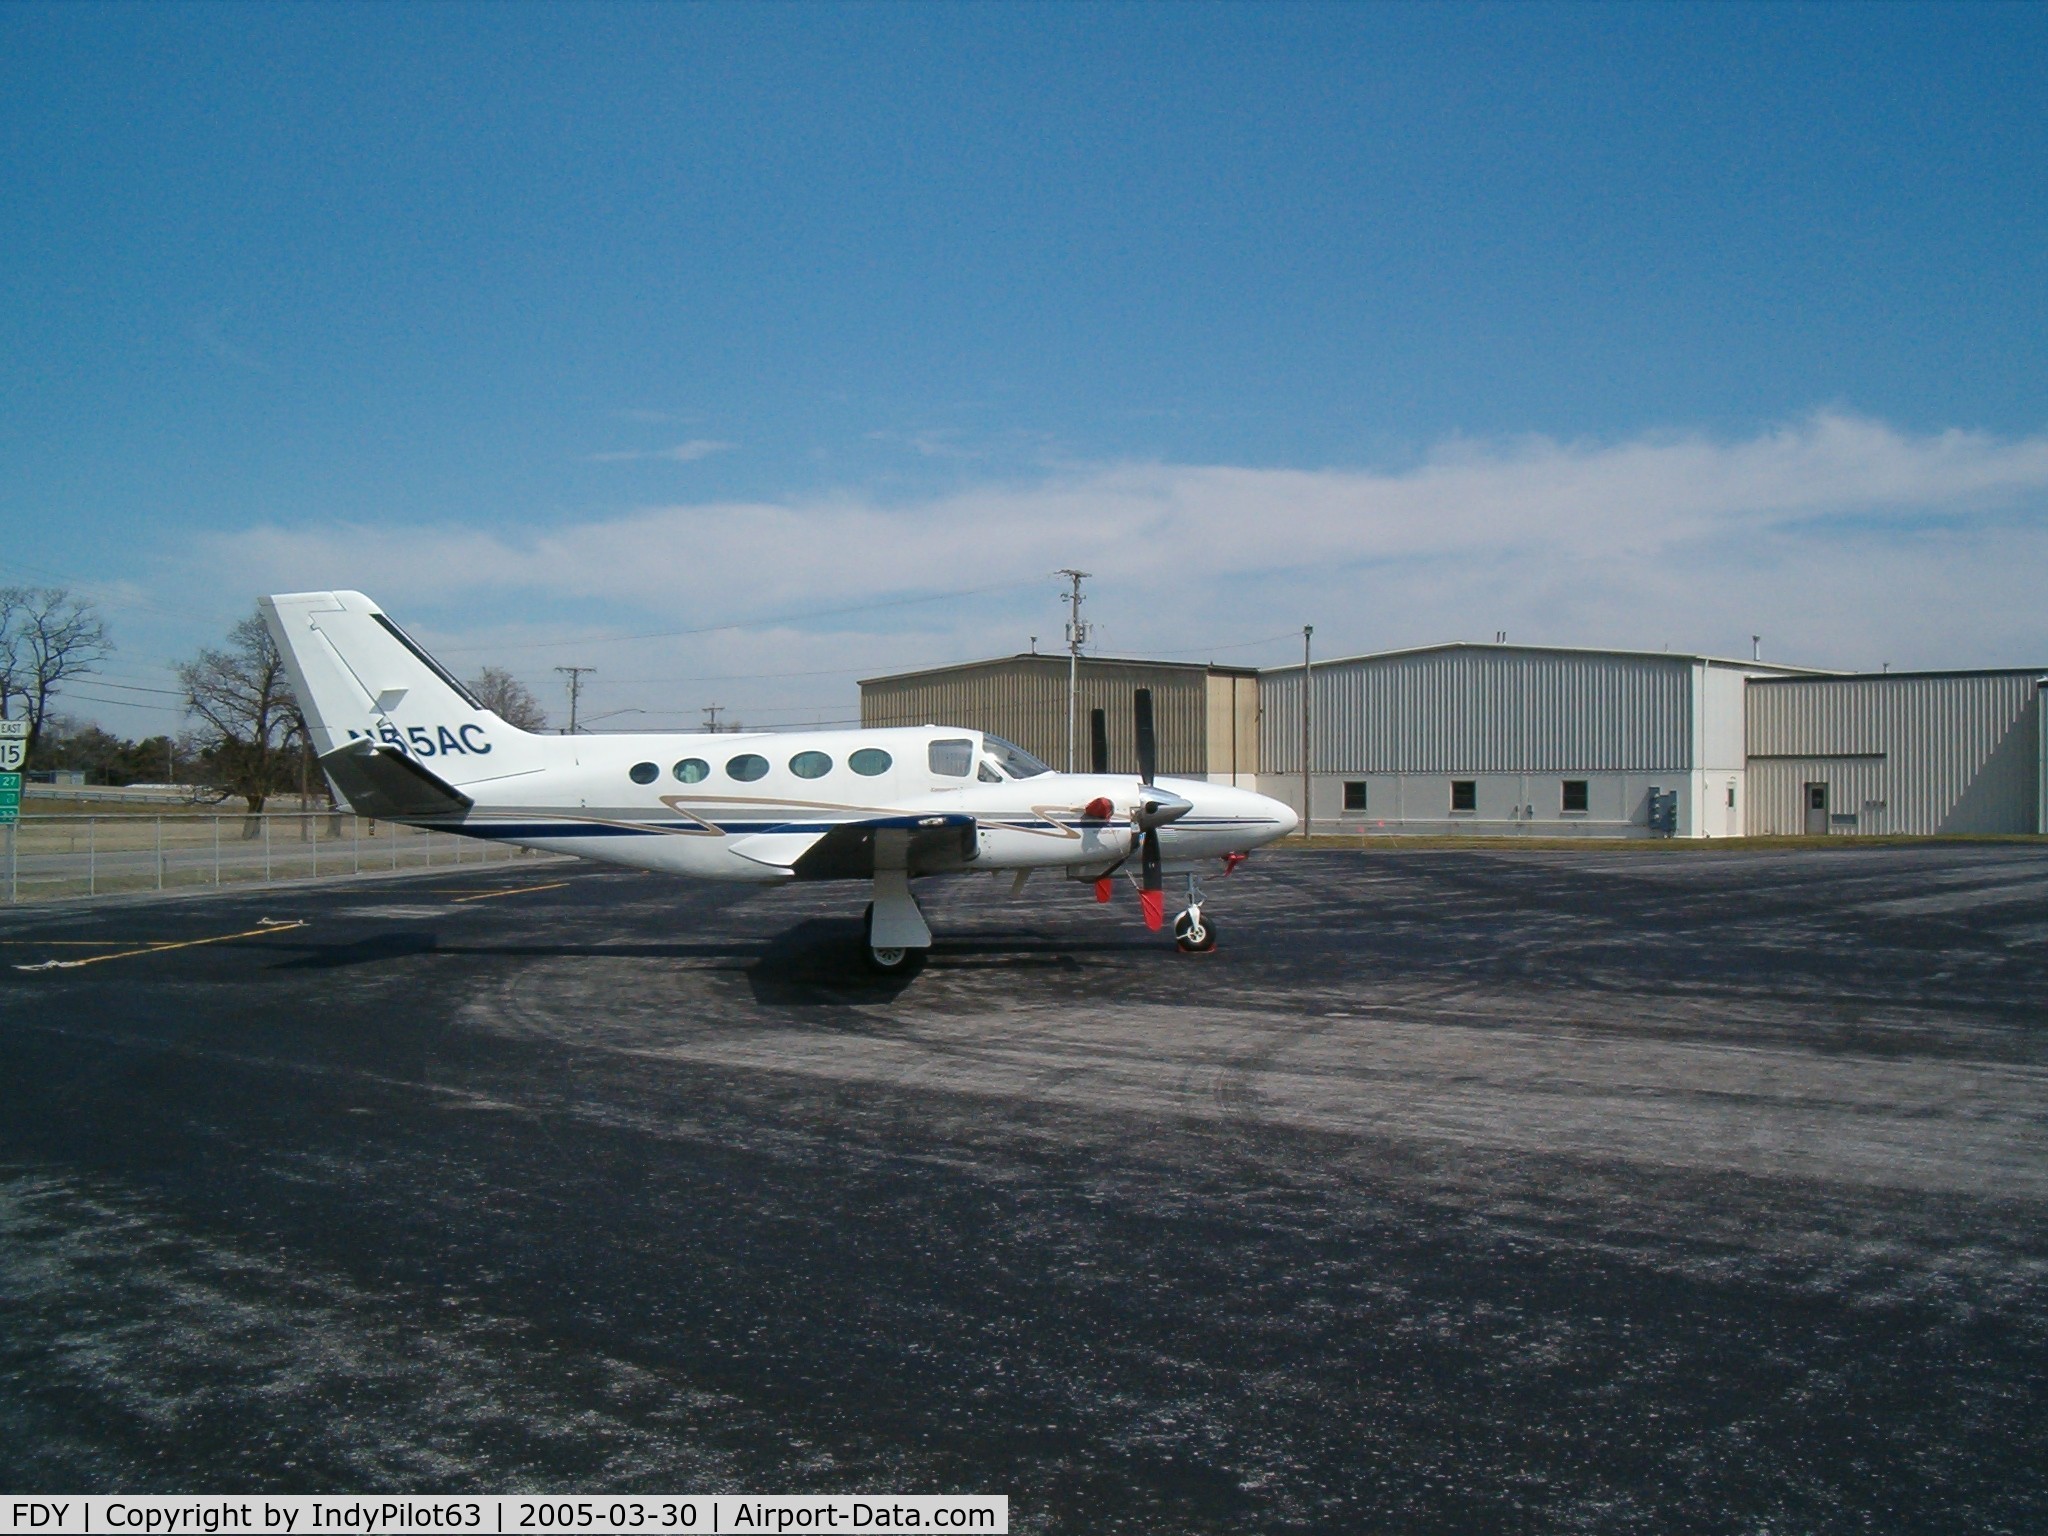 Findlay Airport (FDY) - A Cessna Conquest at Findlay